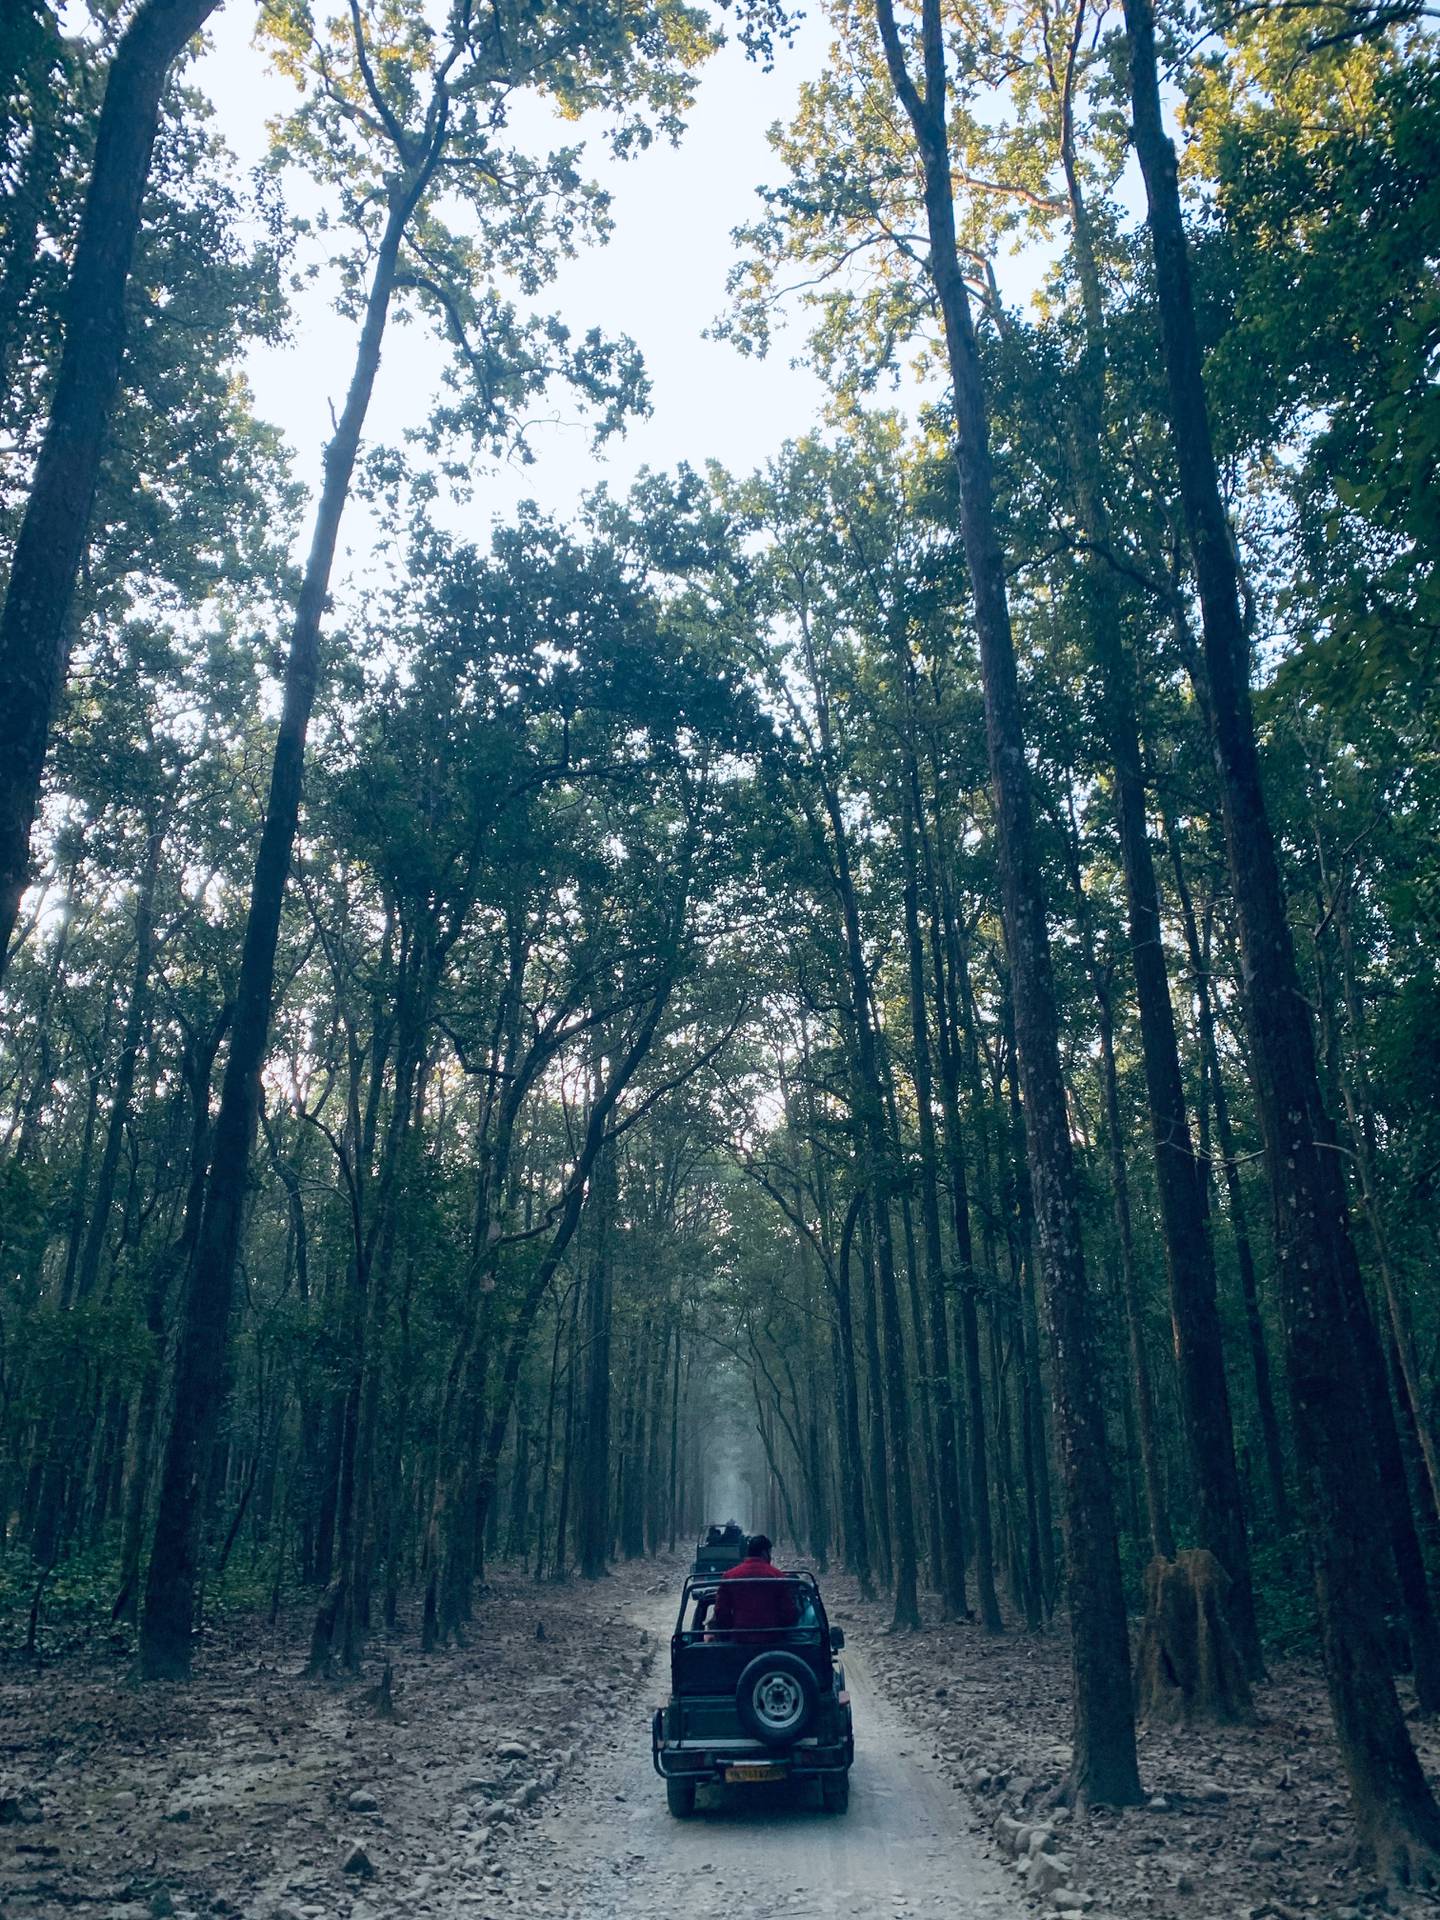 Corbett National Park is named after the celebrated Jim Corbett – railwayman, hunter and proto-conservationist. Unsplash